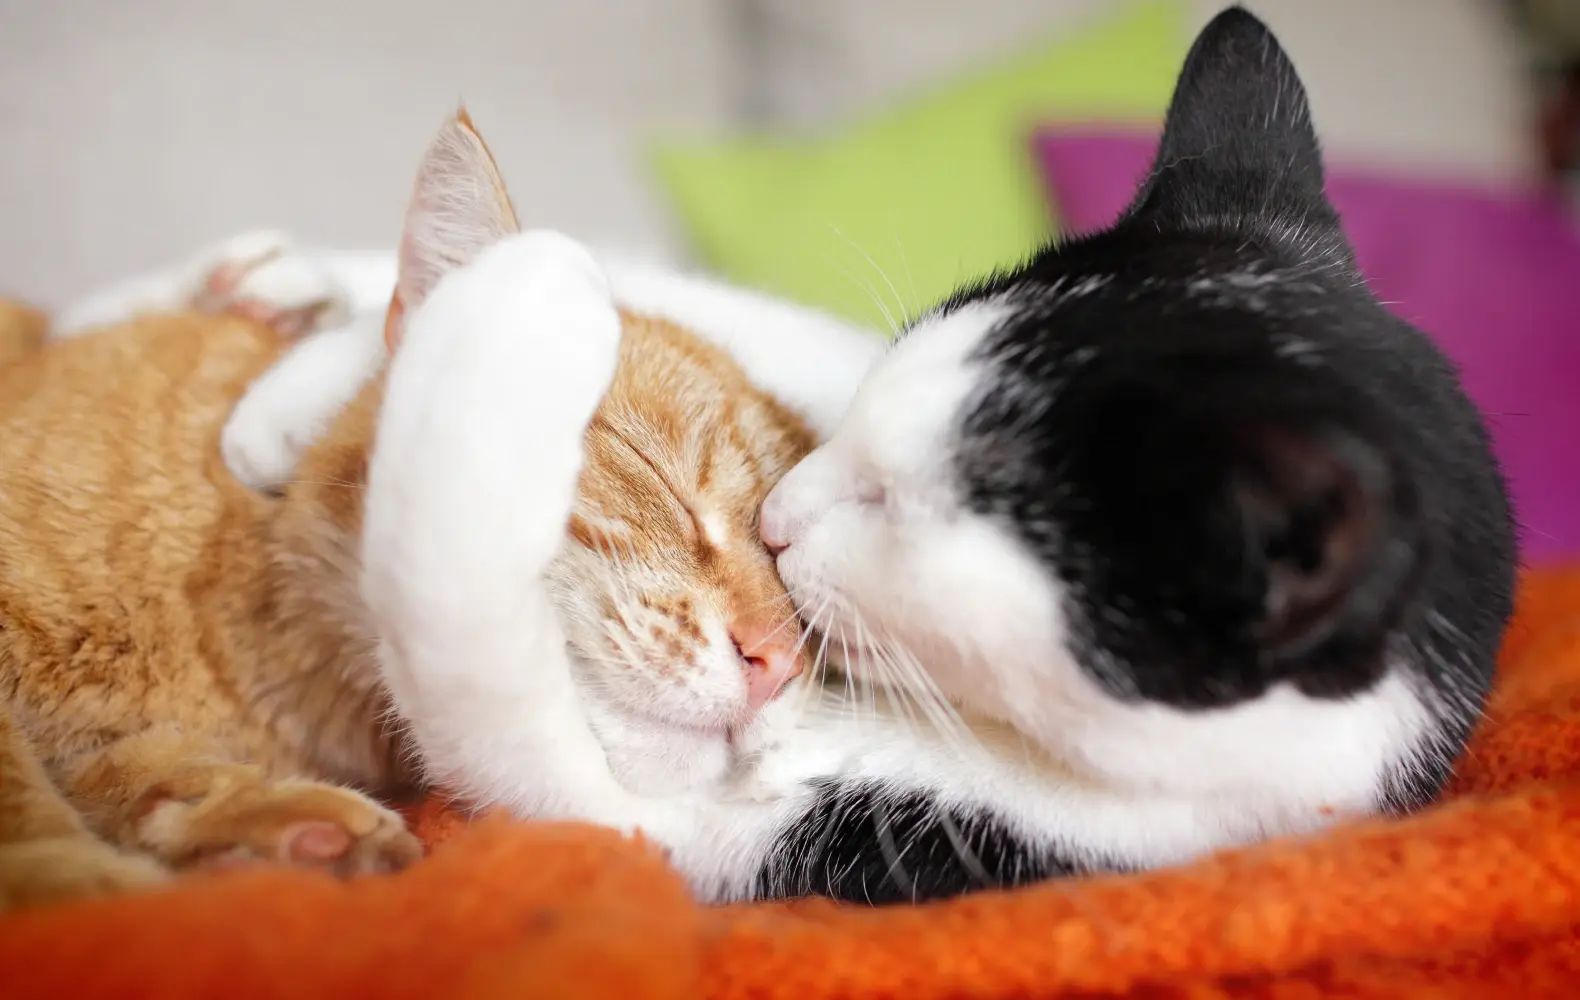 (You guessed it!) An orange cat and a black-and-white cat snuggle together on a soft blanket, the black-and-white cat nuzzling the orange cat’s face.